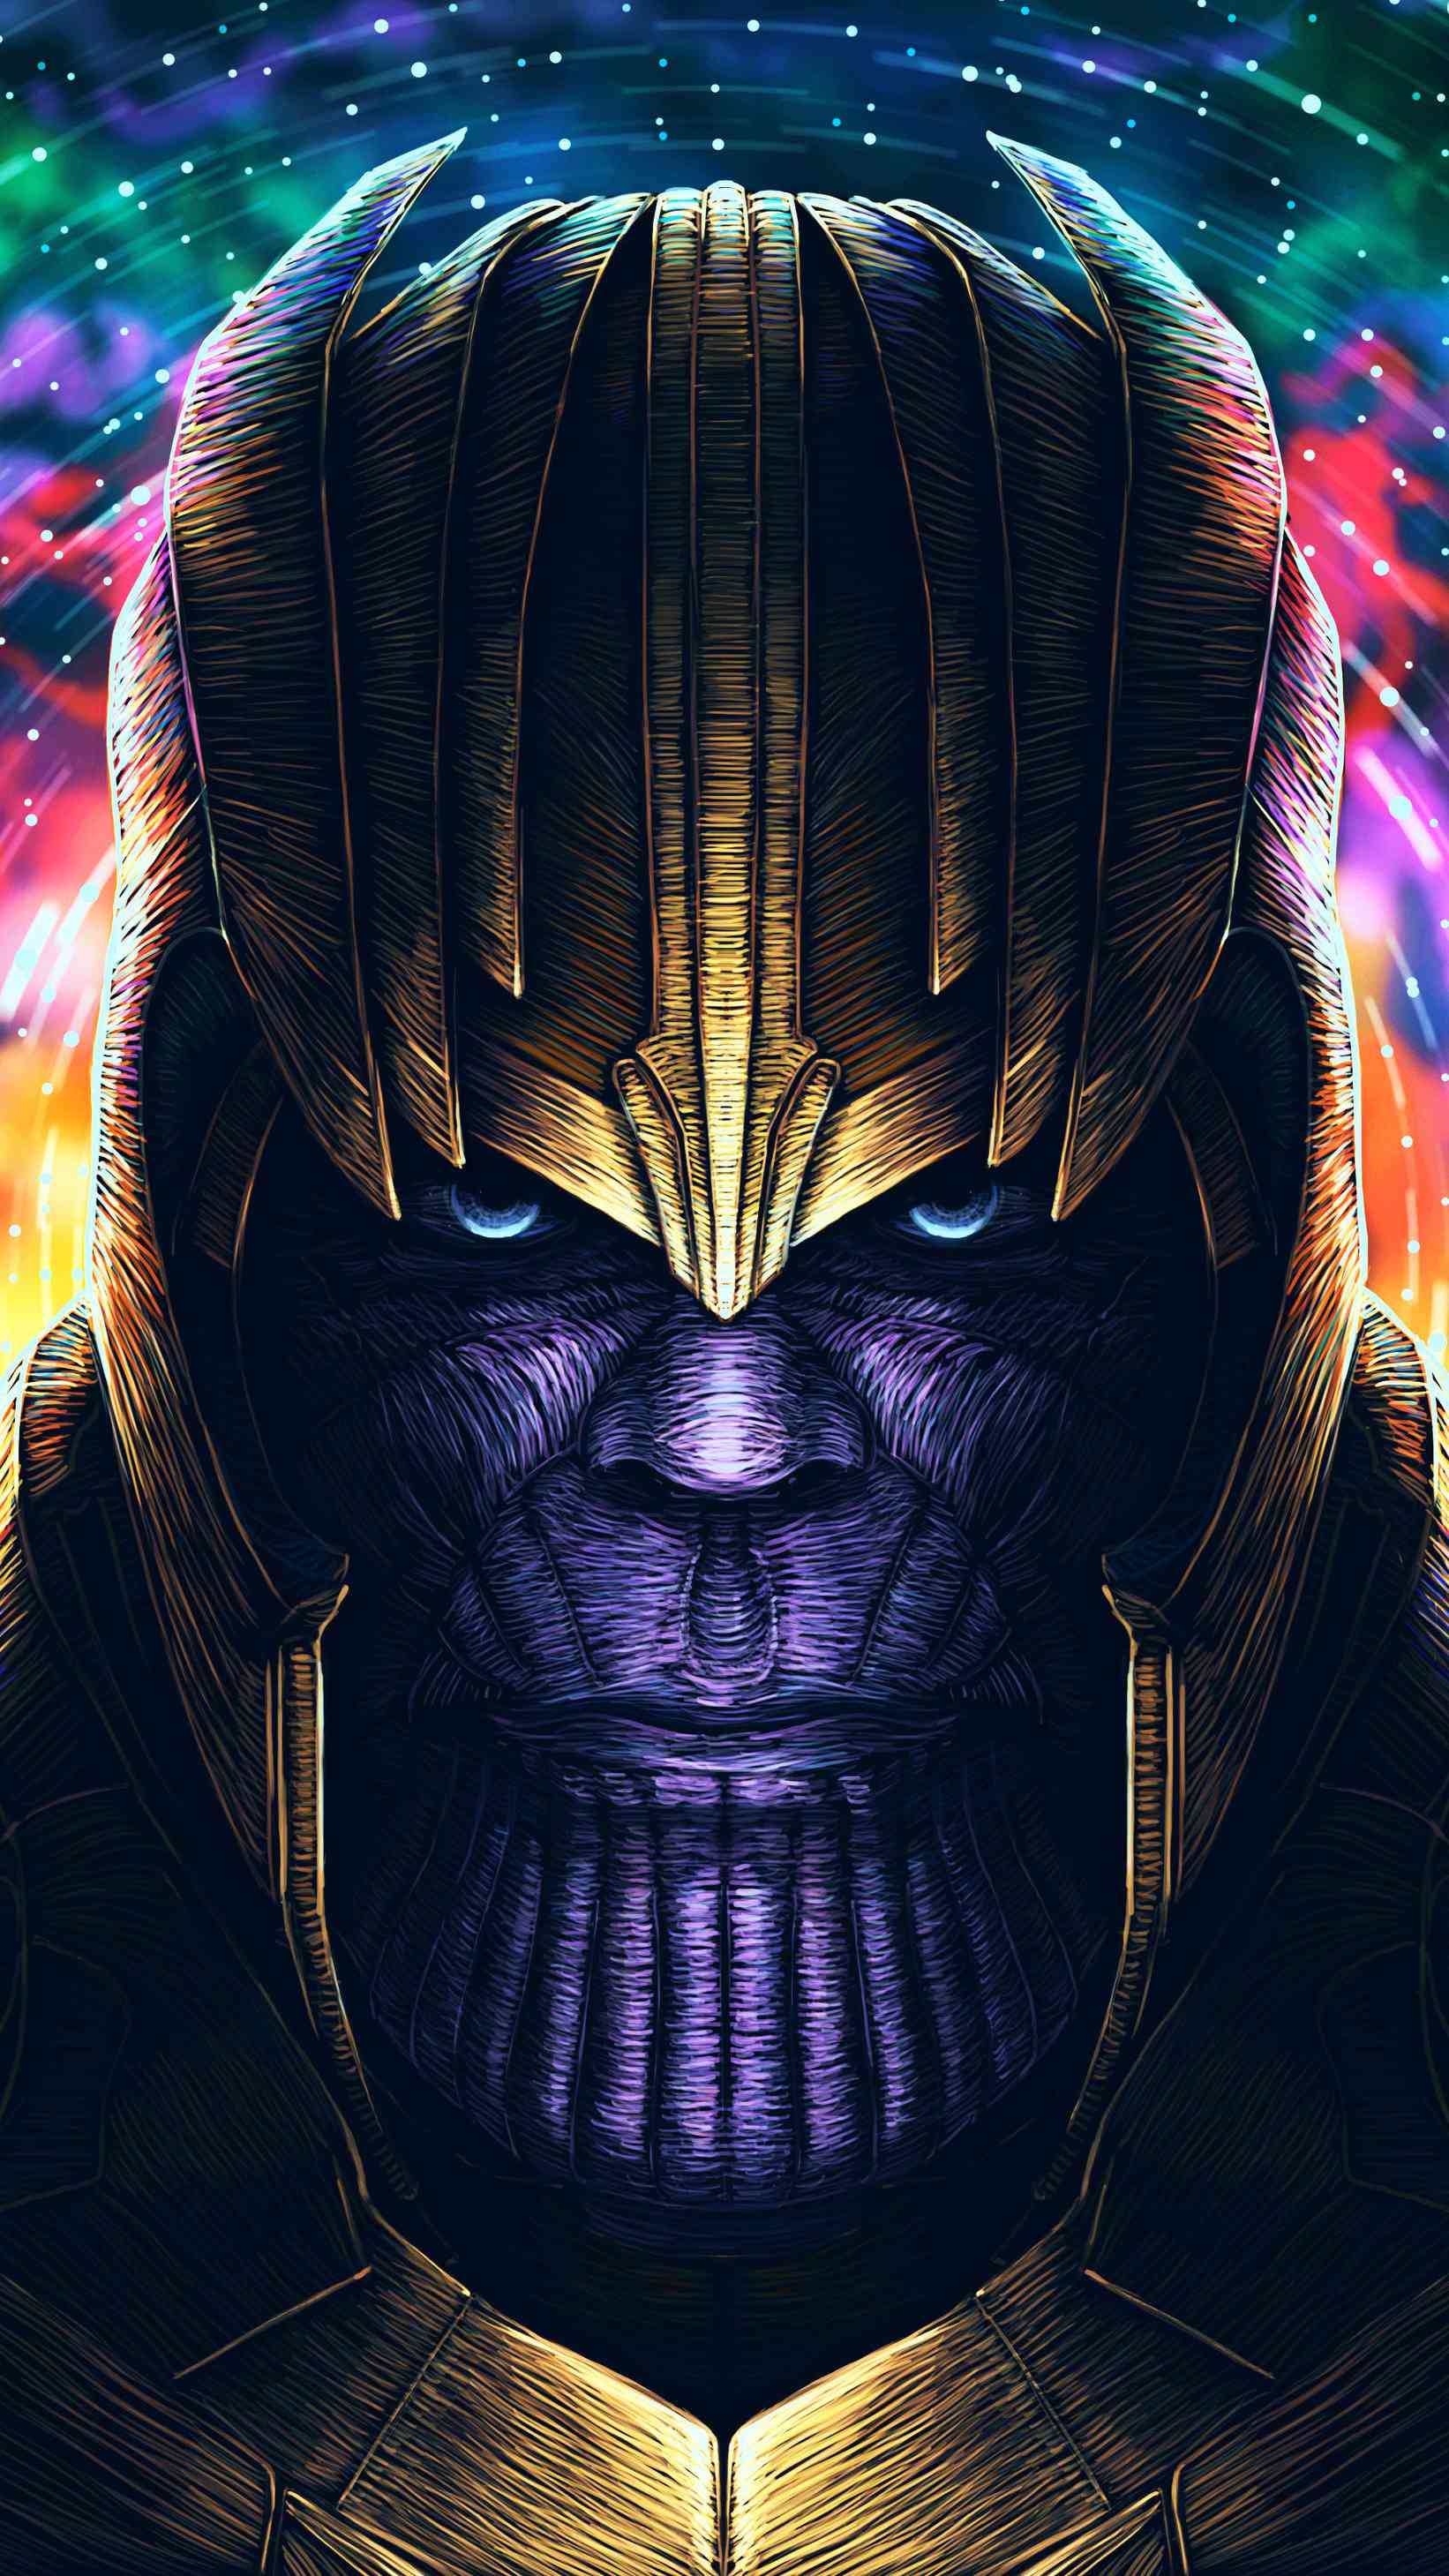 Thanos Endgame IPhone Wallpaper - IPhone Wallpapers : iPhone Wallpapers